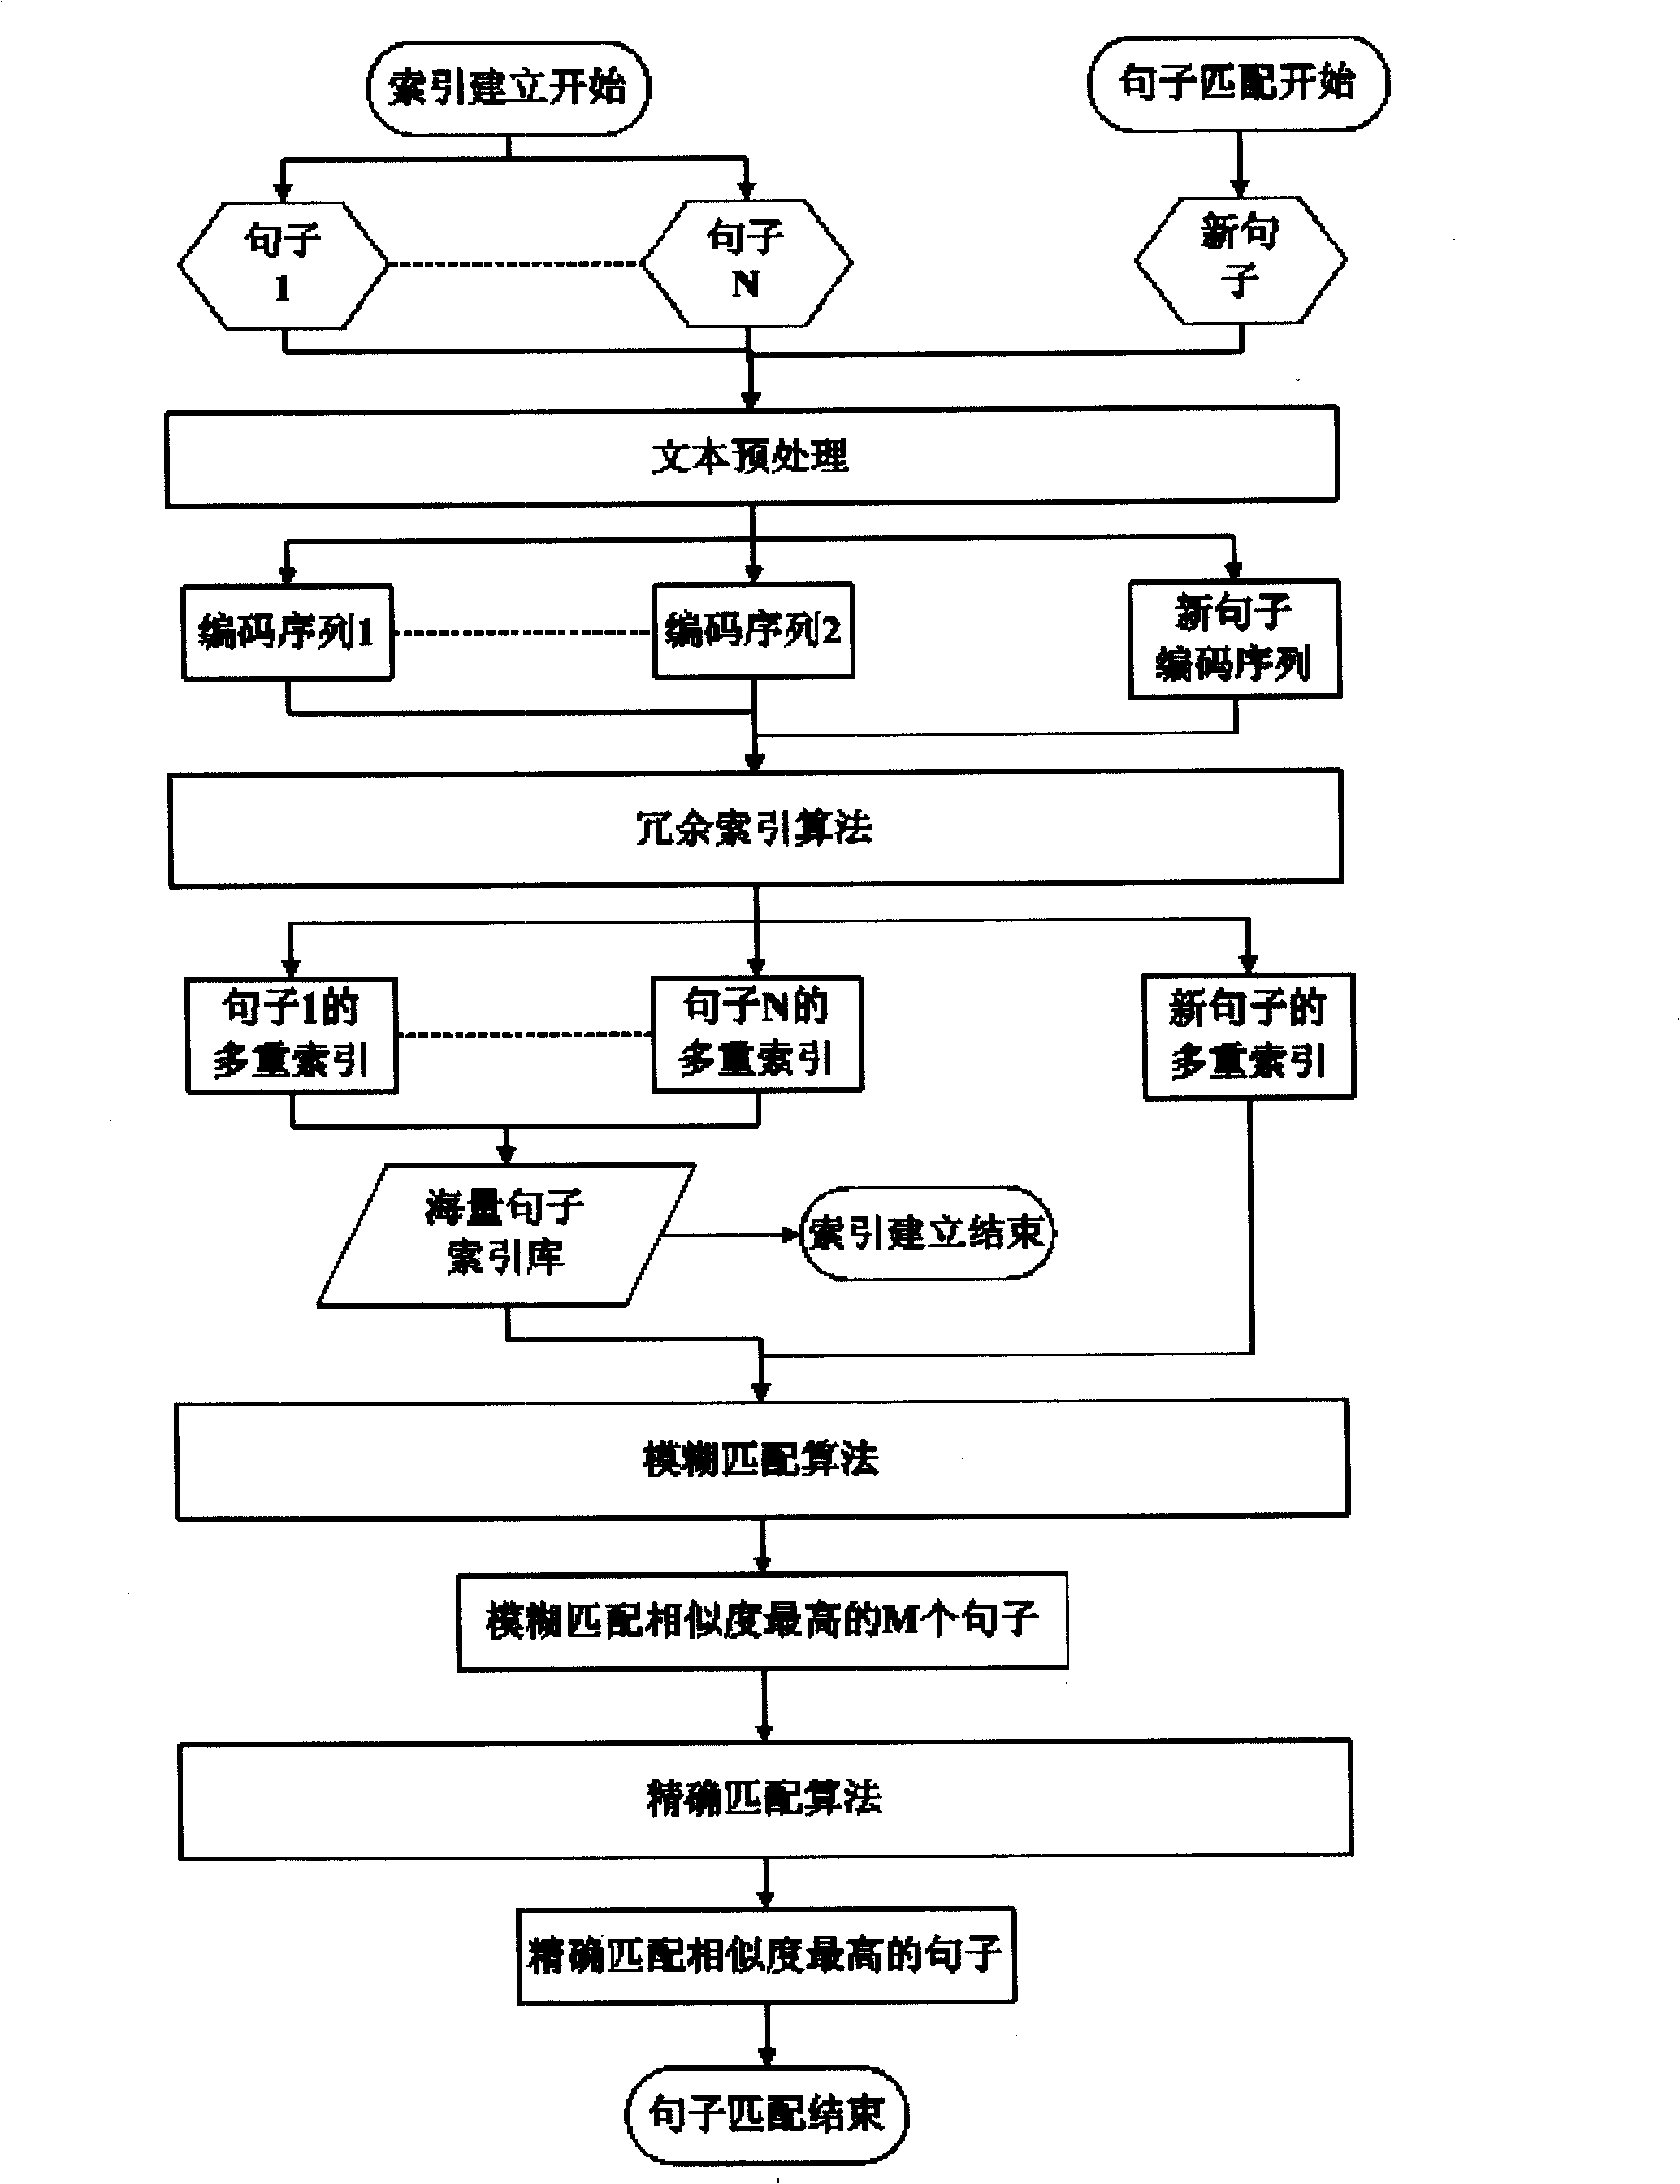 Large scale rapid matching method of sentence surface